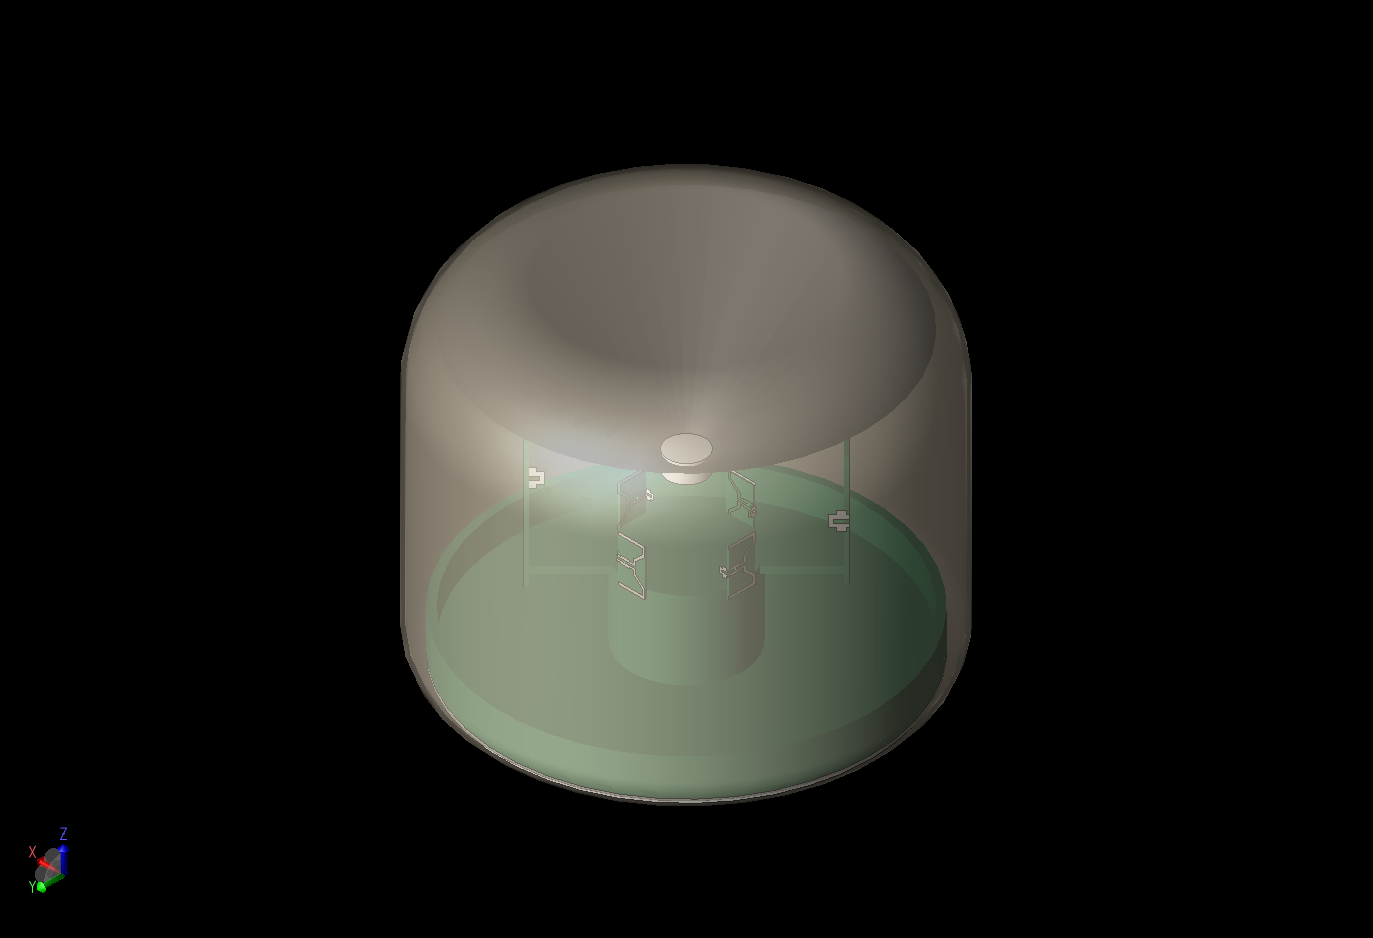 Figure 1:  A three-dimensional view of a generic WiFi router device is shown with the internal antenna arrays partially visible through the cover.